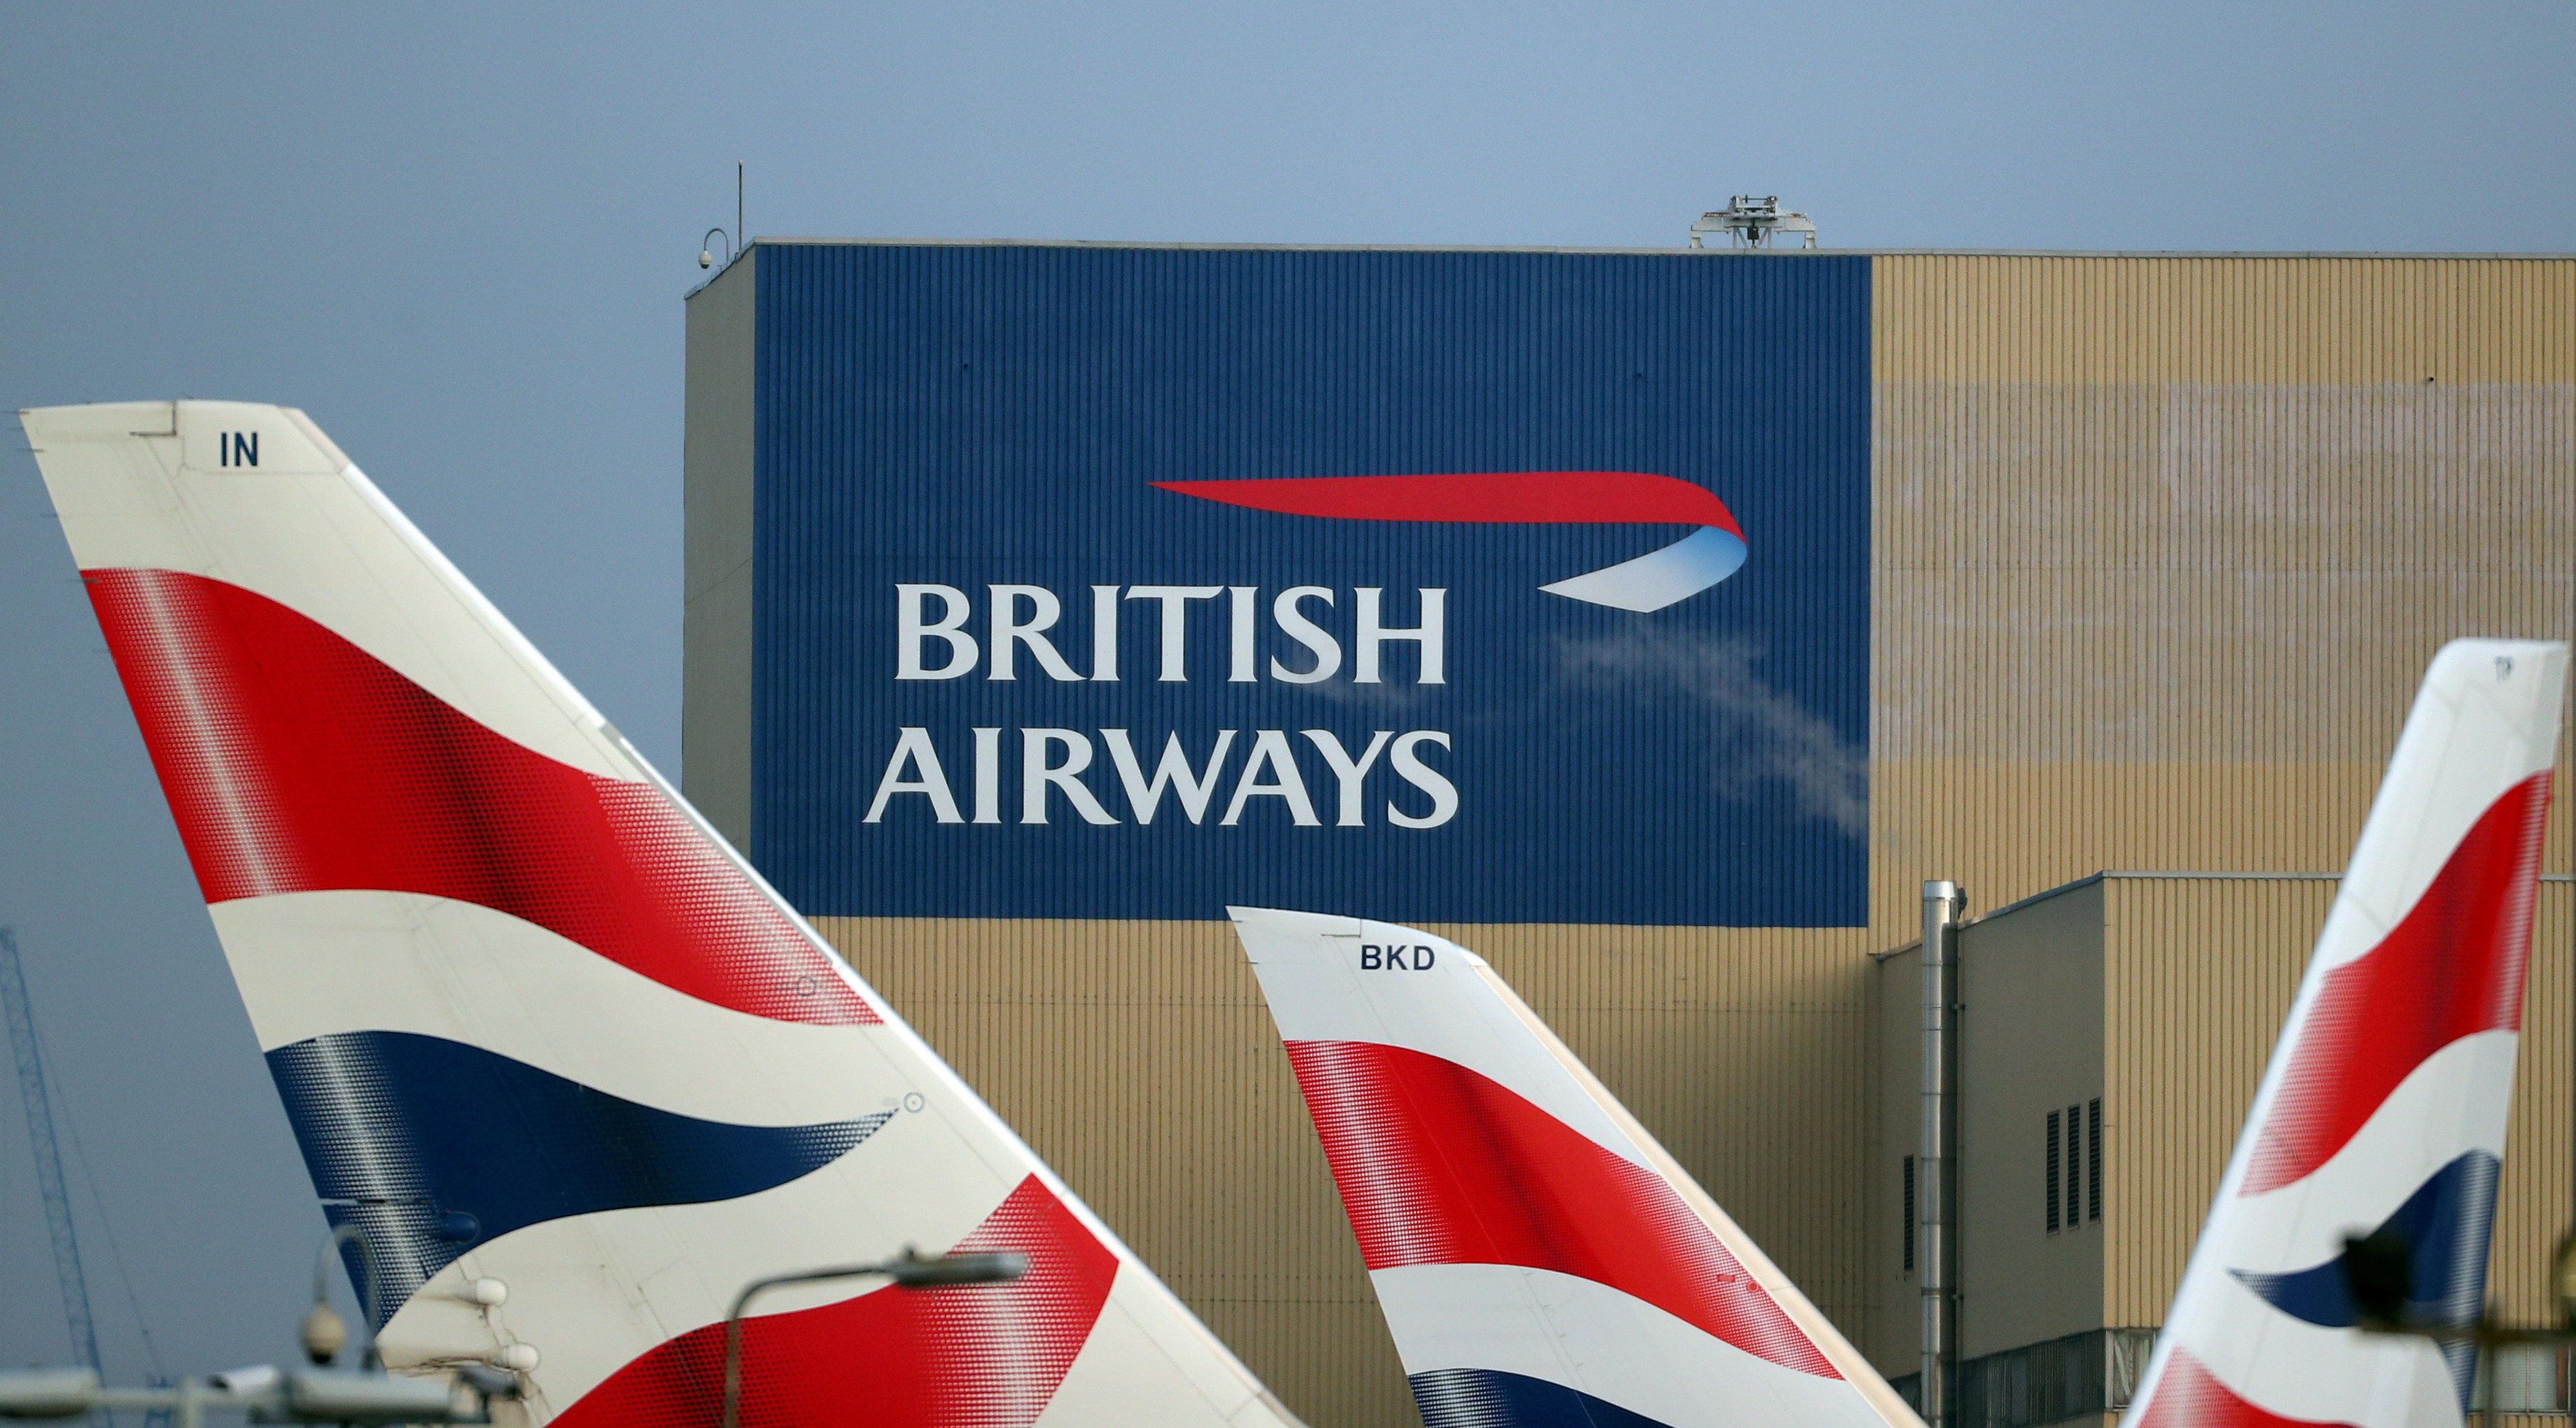 British Airways logos are seen on tail fins at Heathrow Airport in west London